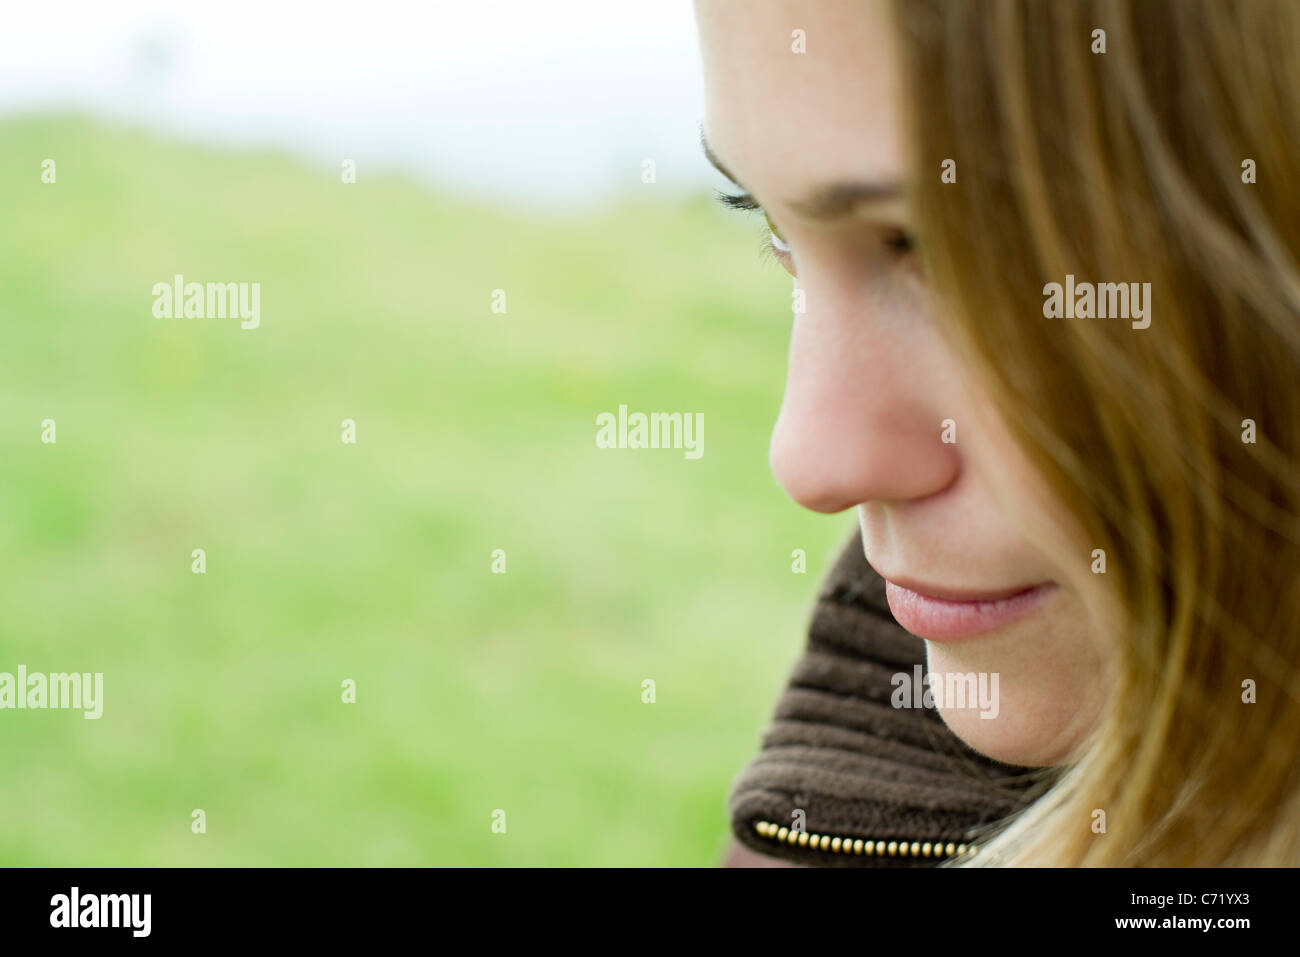 Young woman, side view Stock Photo